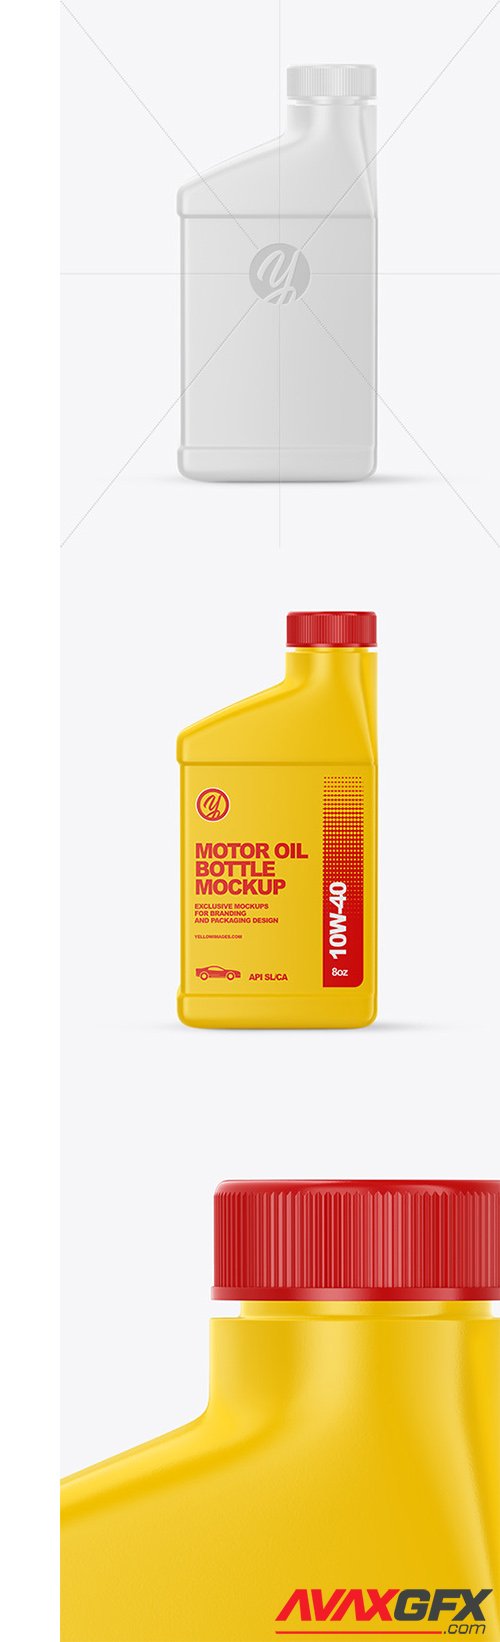 Download Metallic Motor Oil Bottle Mockup 61555 » AVAXGFX - All Downloads that You Need in One Place ...